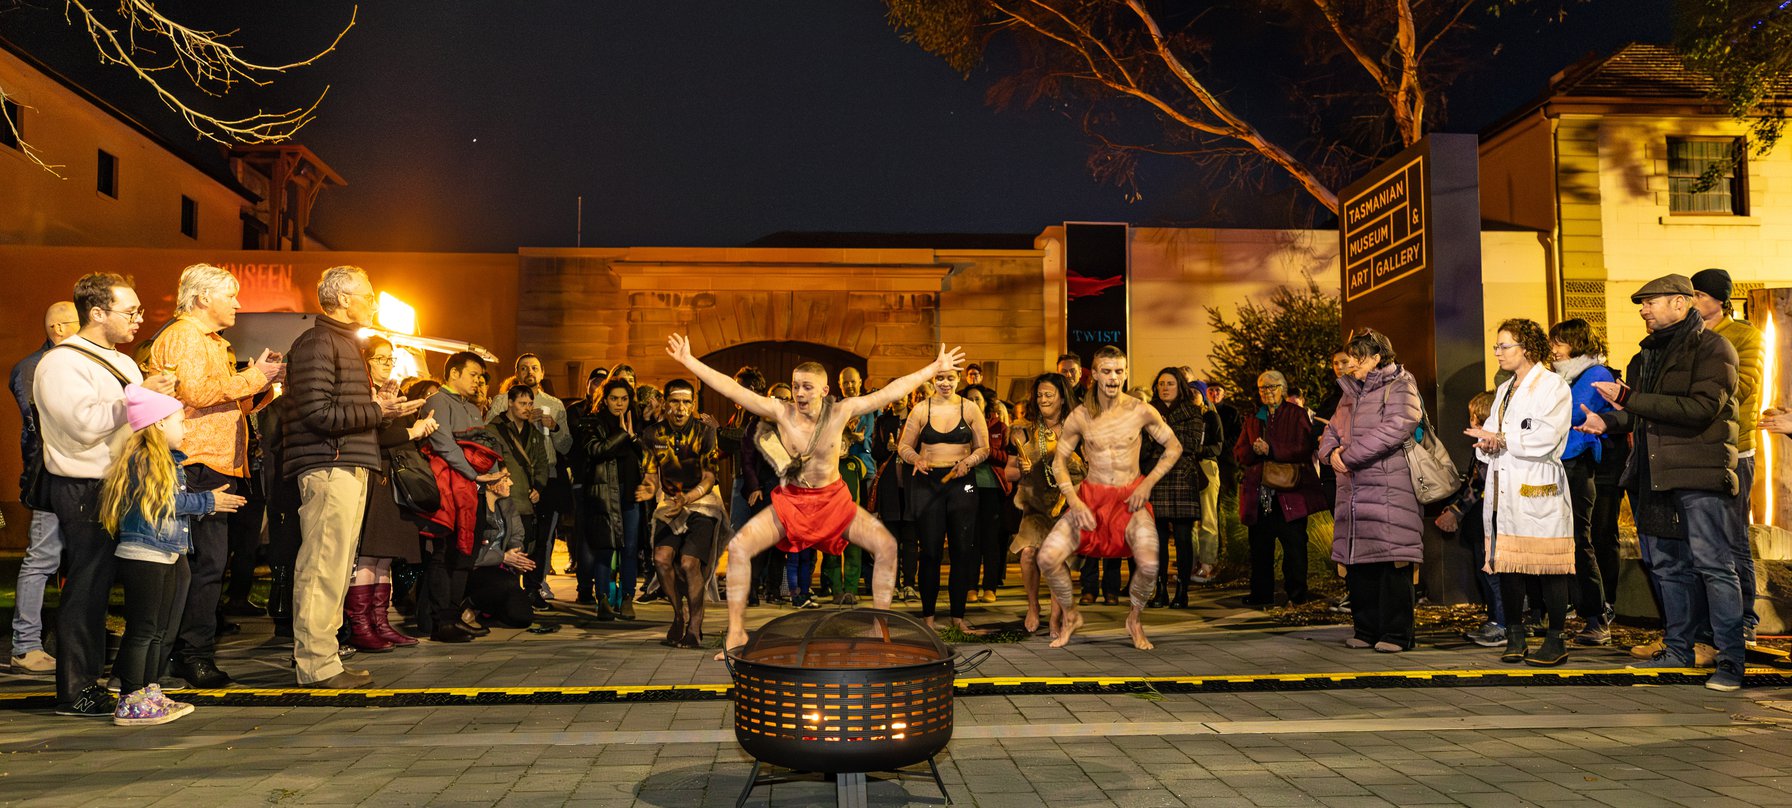 A photo of Sienna, Zane and Xavier Scotney-Barron performing traditional Aboriginal dance and song around a fire pit. Performers are leaping in the air while other use clap sticks. A crowd encircles them, watching. Credit Jillian Mundy.